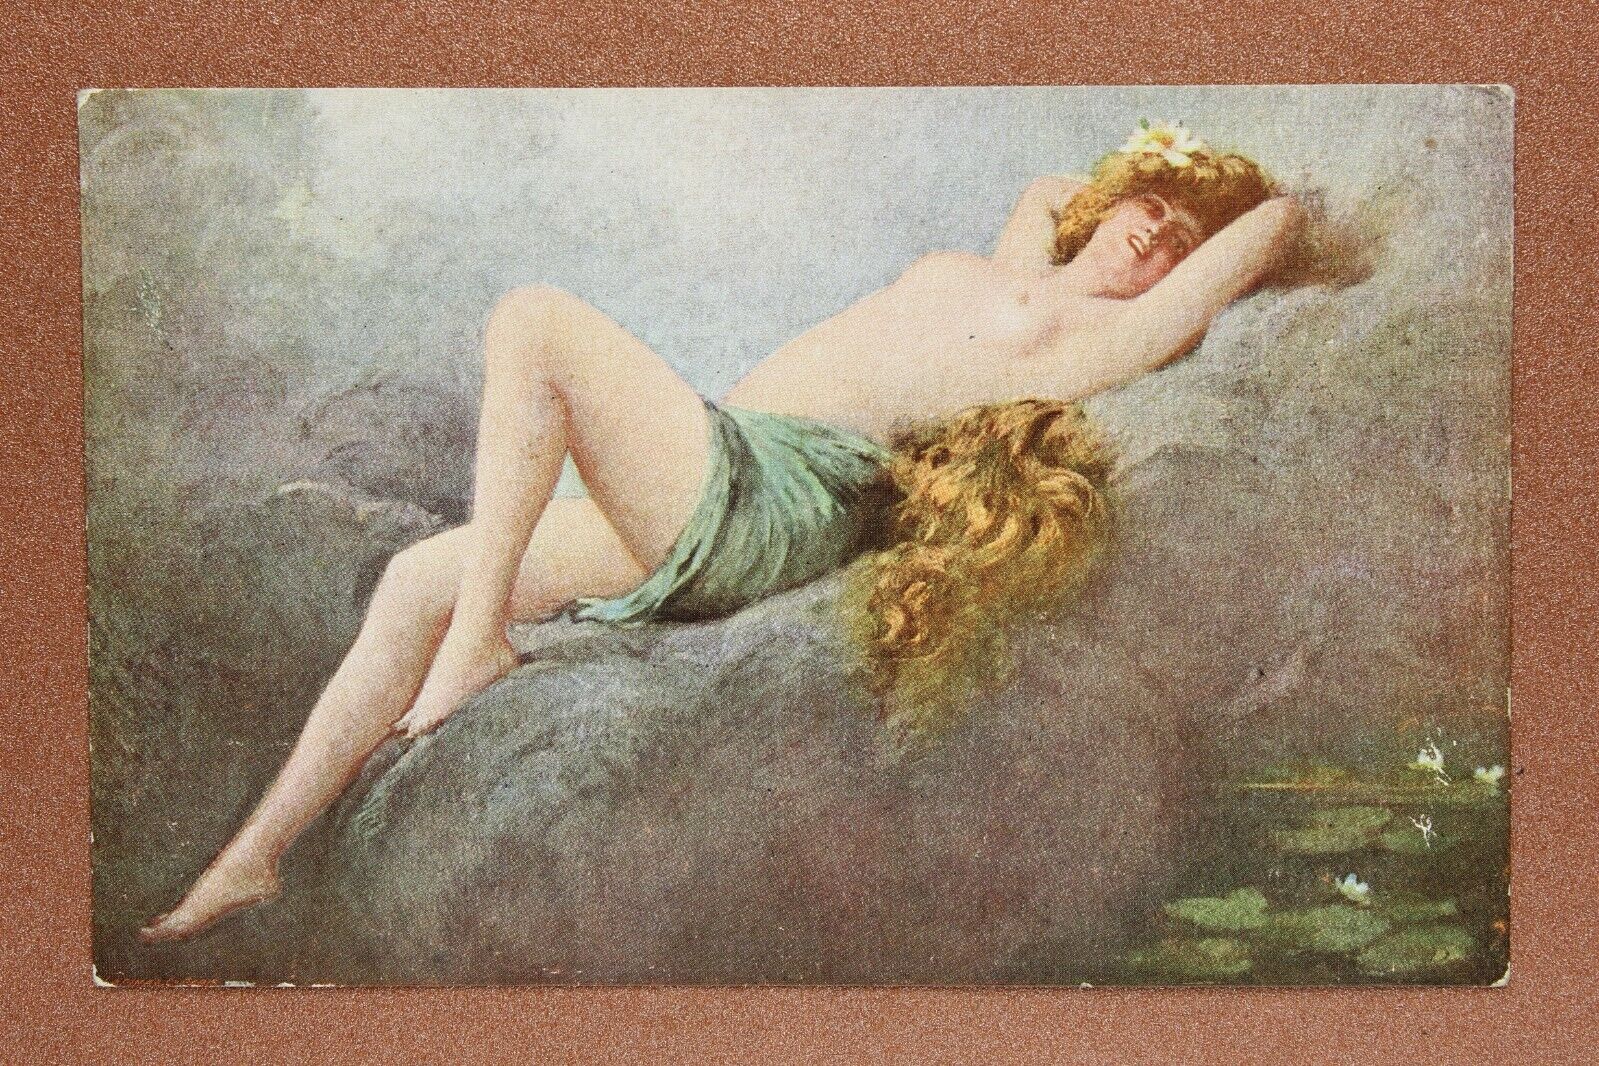 Nymph Mermaid Nude witch. Water flower. Tsarist Russia Lapina postcard 1909s